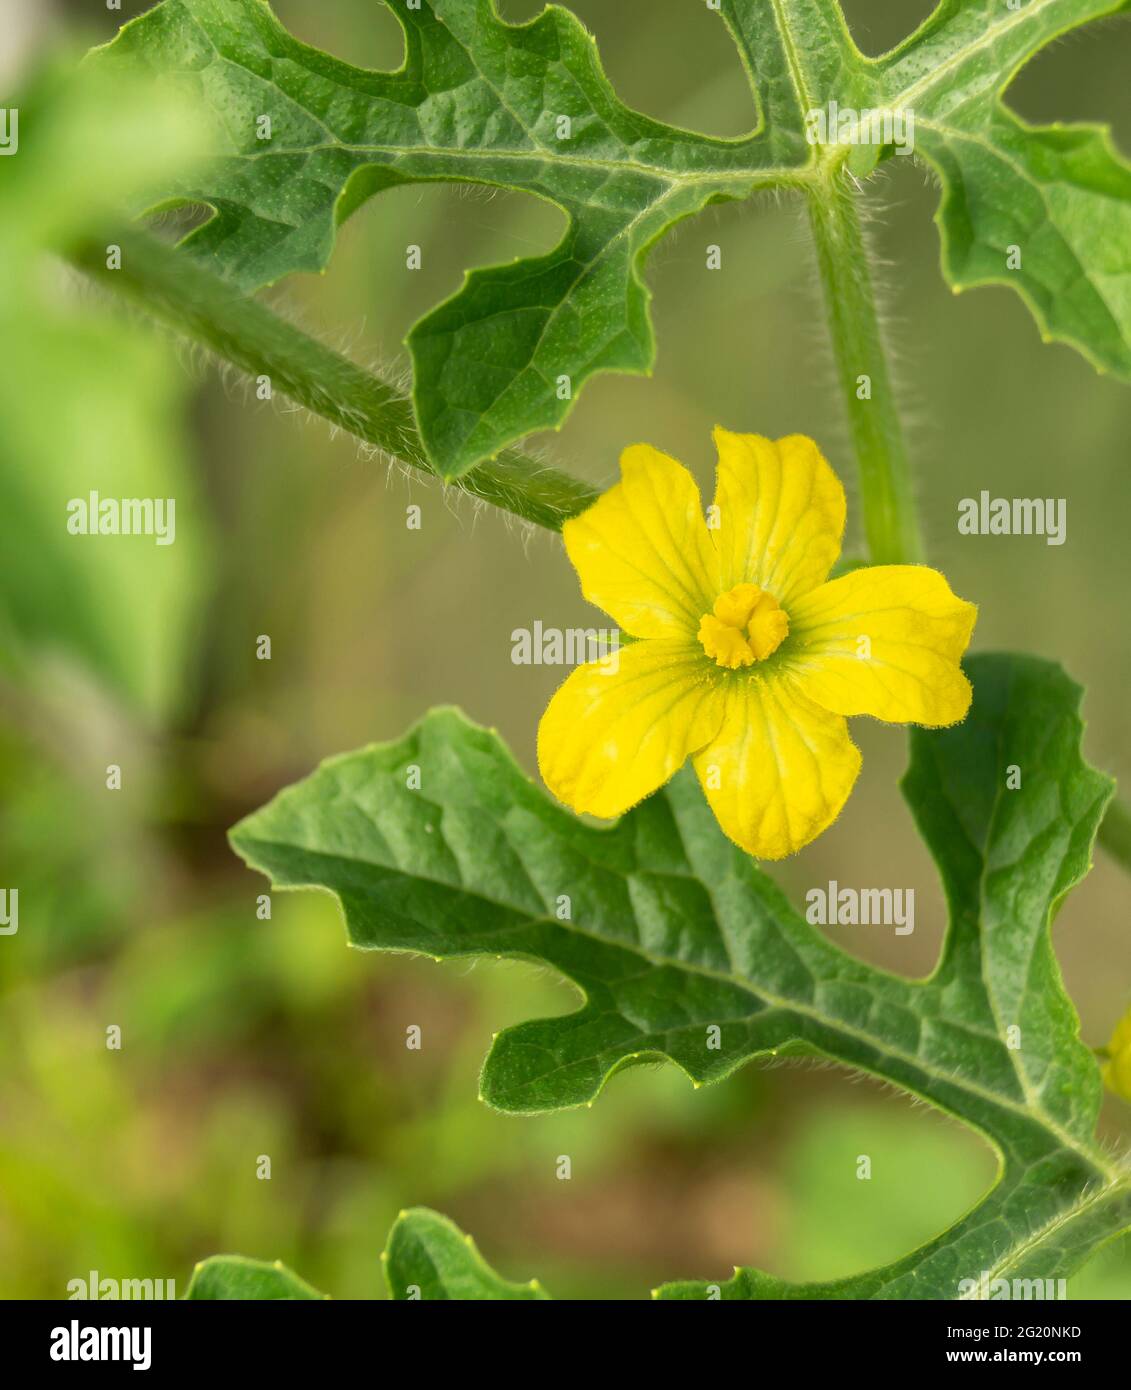 Yellow watermelon flower with green leaves.Beauty in nature in spring Stock Photo